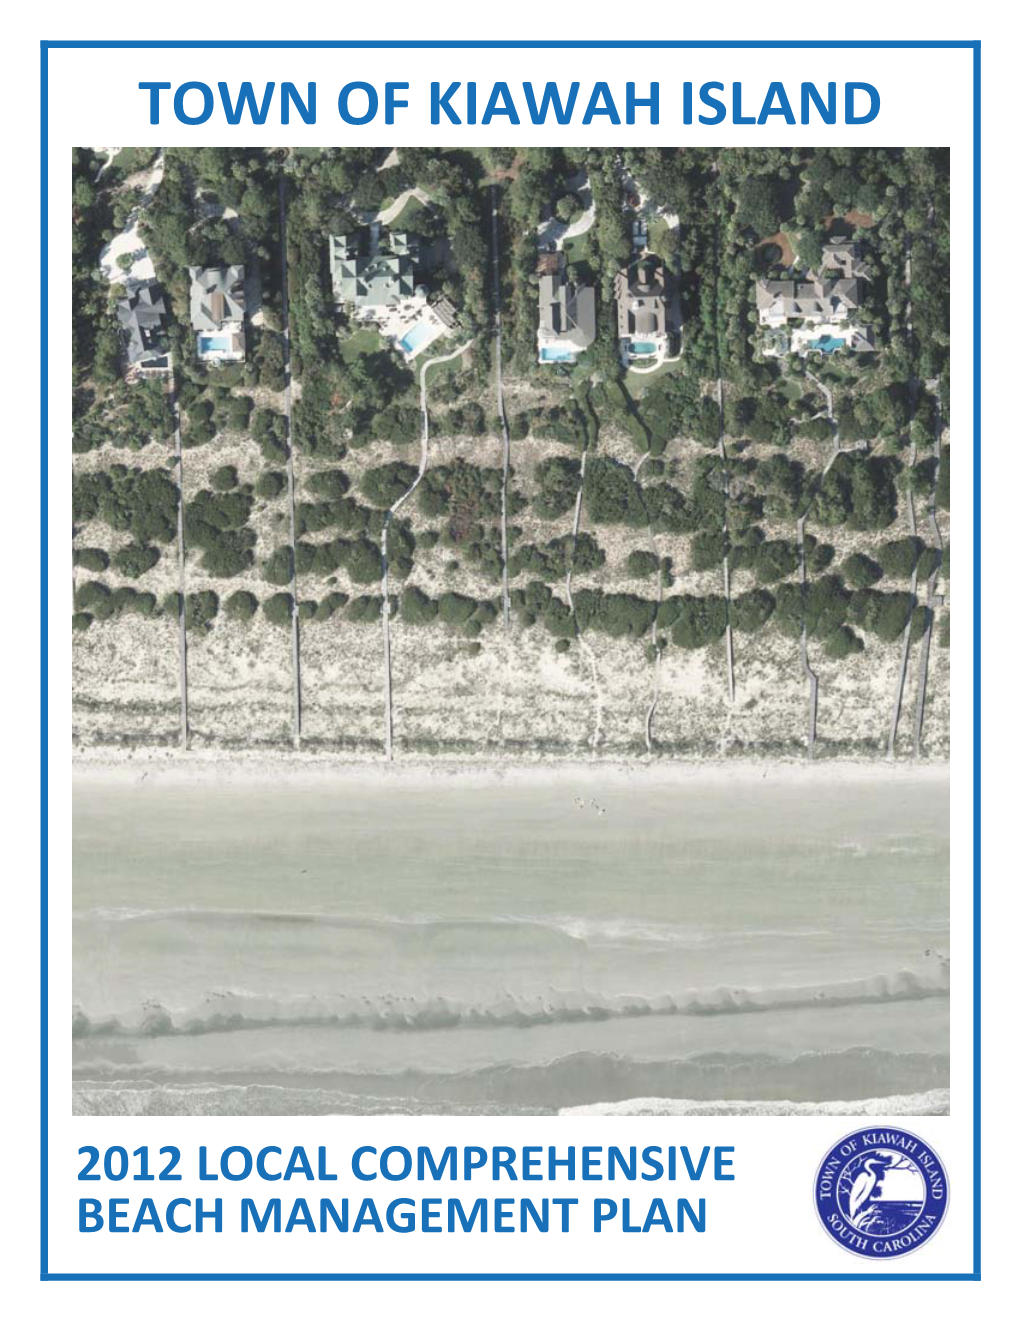 Town of Kiawah Island Local Comprehensive Beach Management Plan Table of Contents